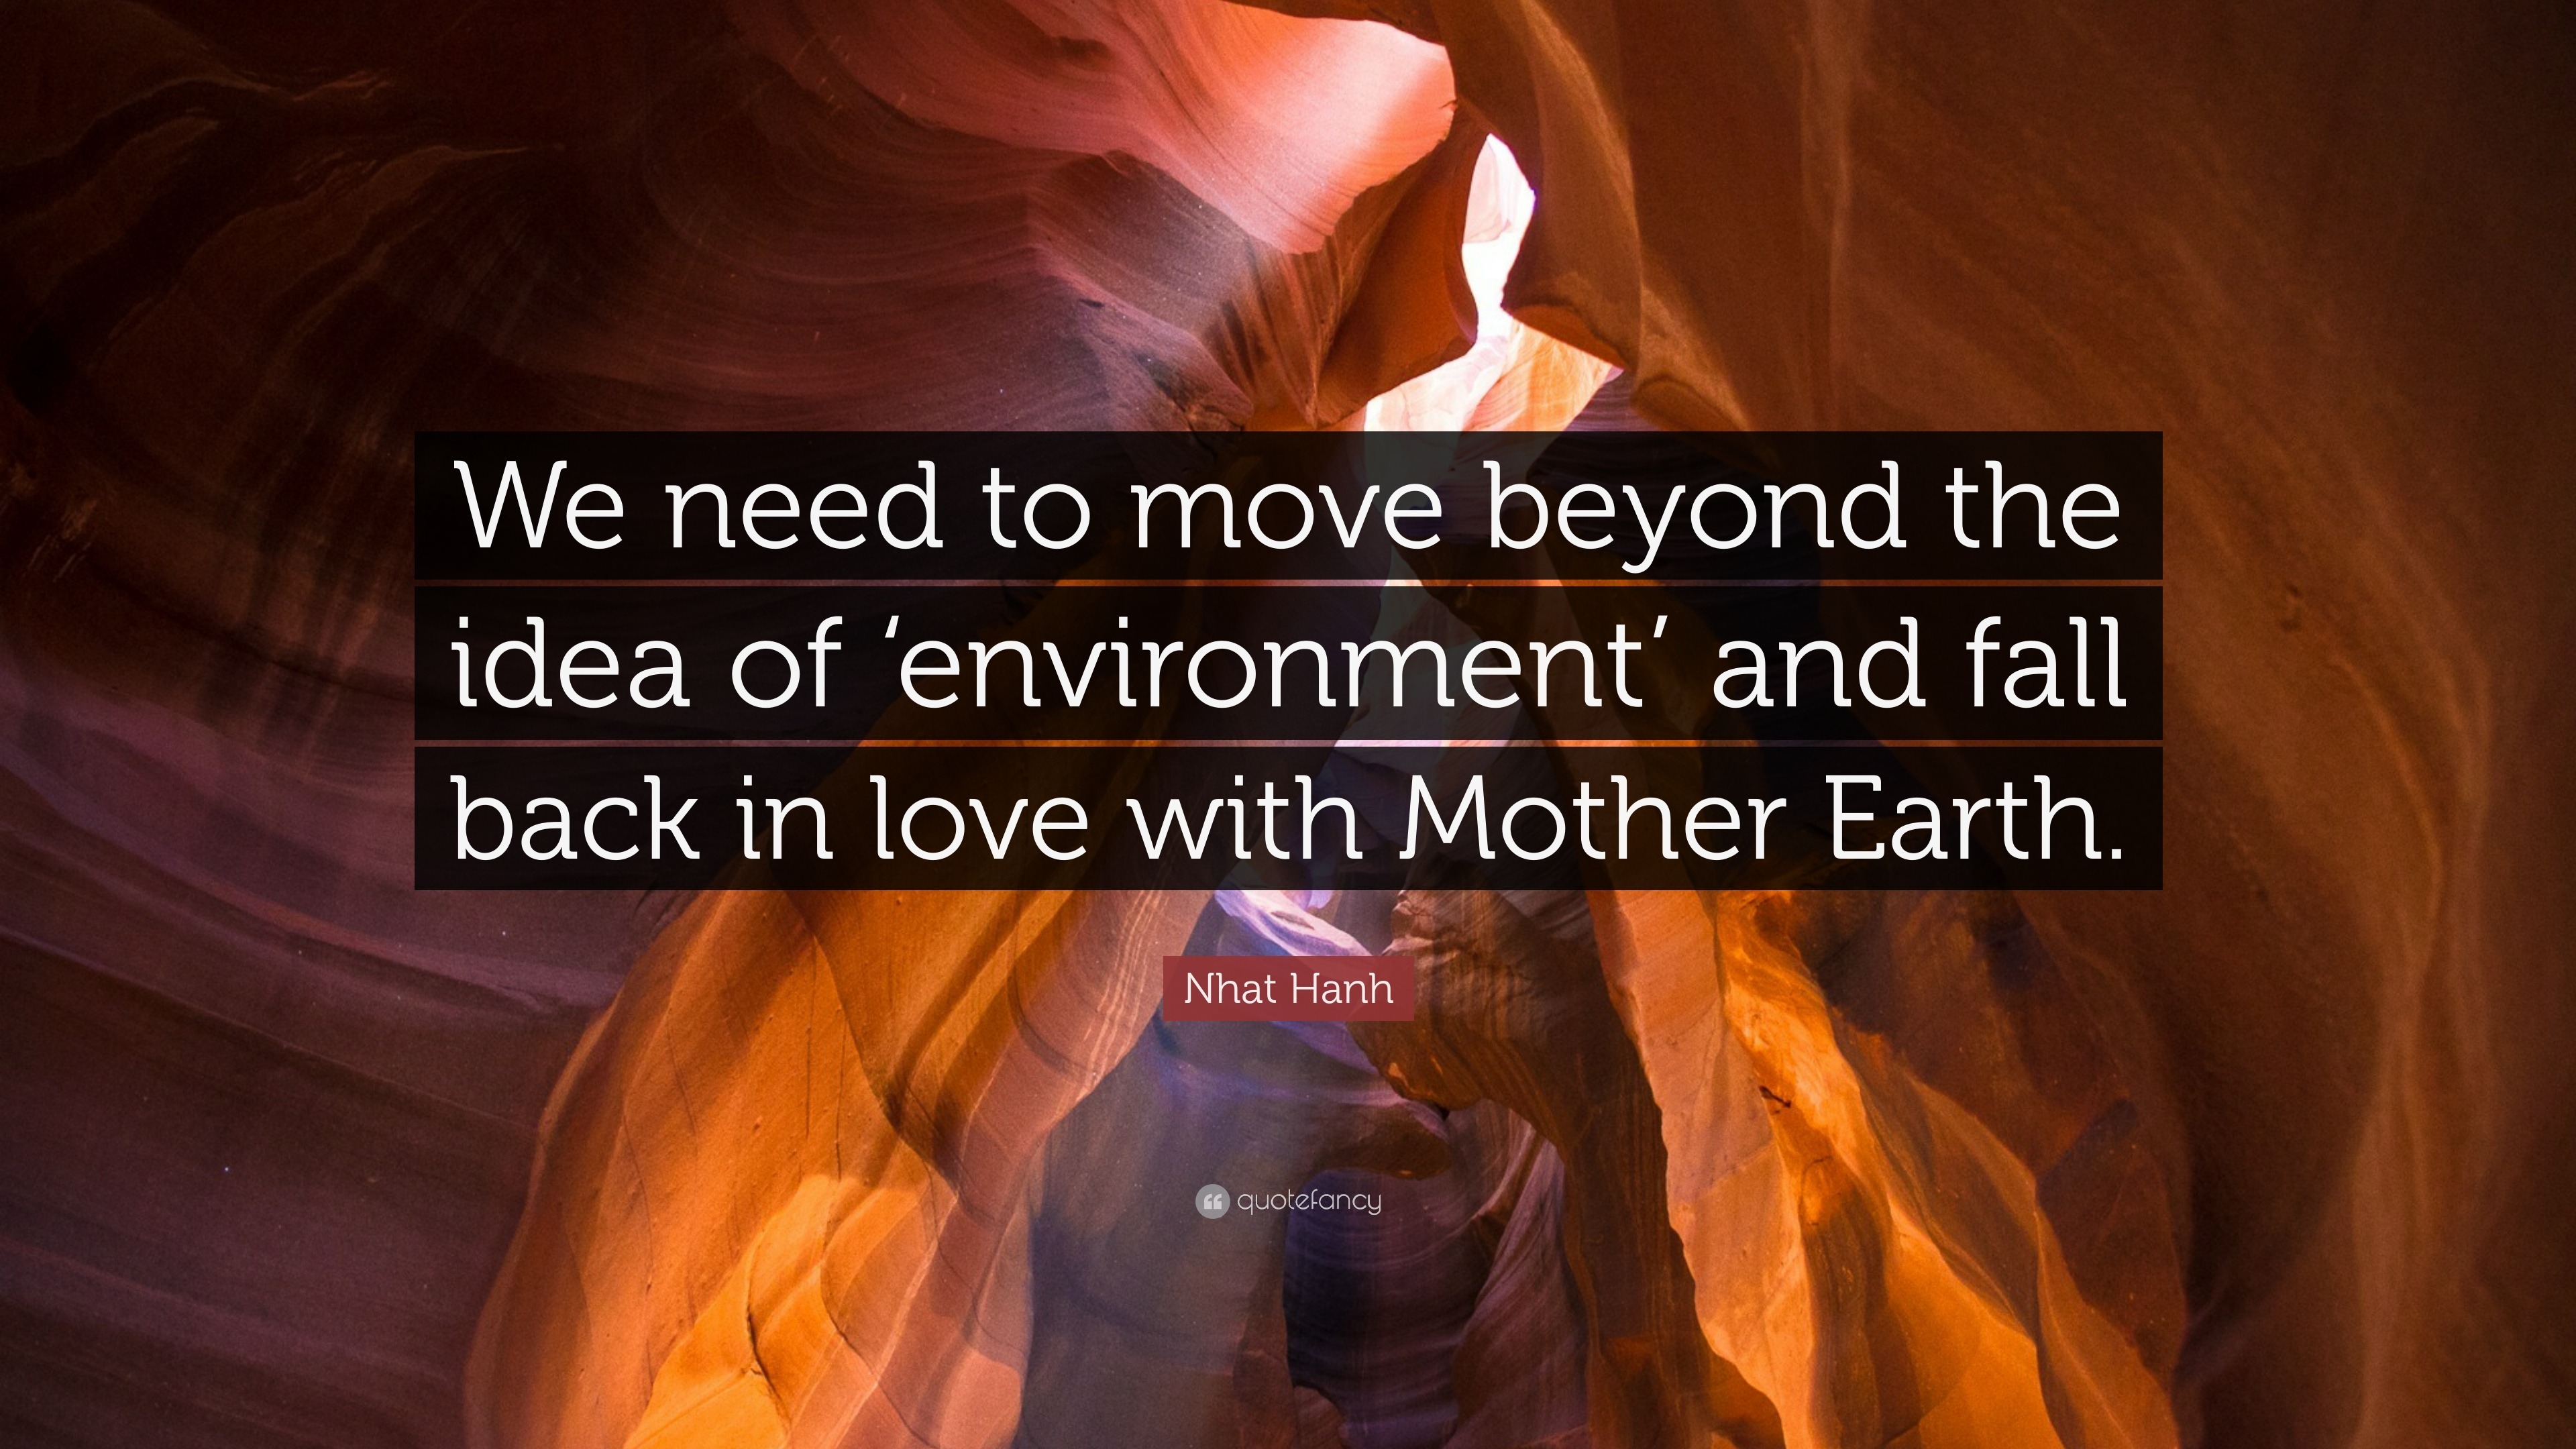 Nhat Hanh Quote “We need to move beyond the idea of environment